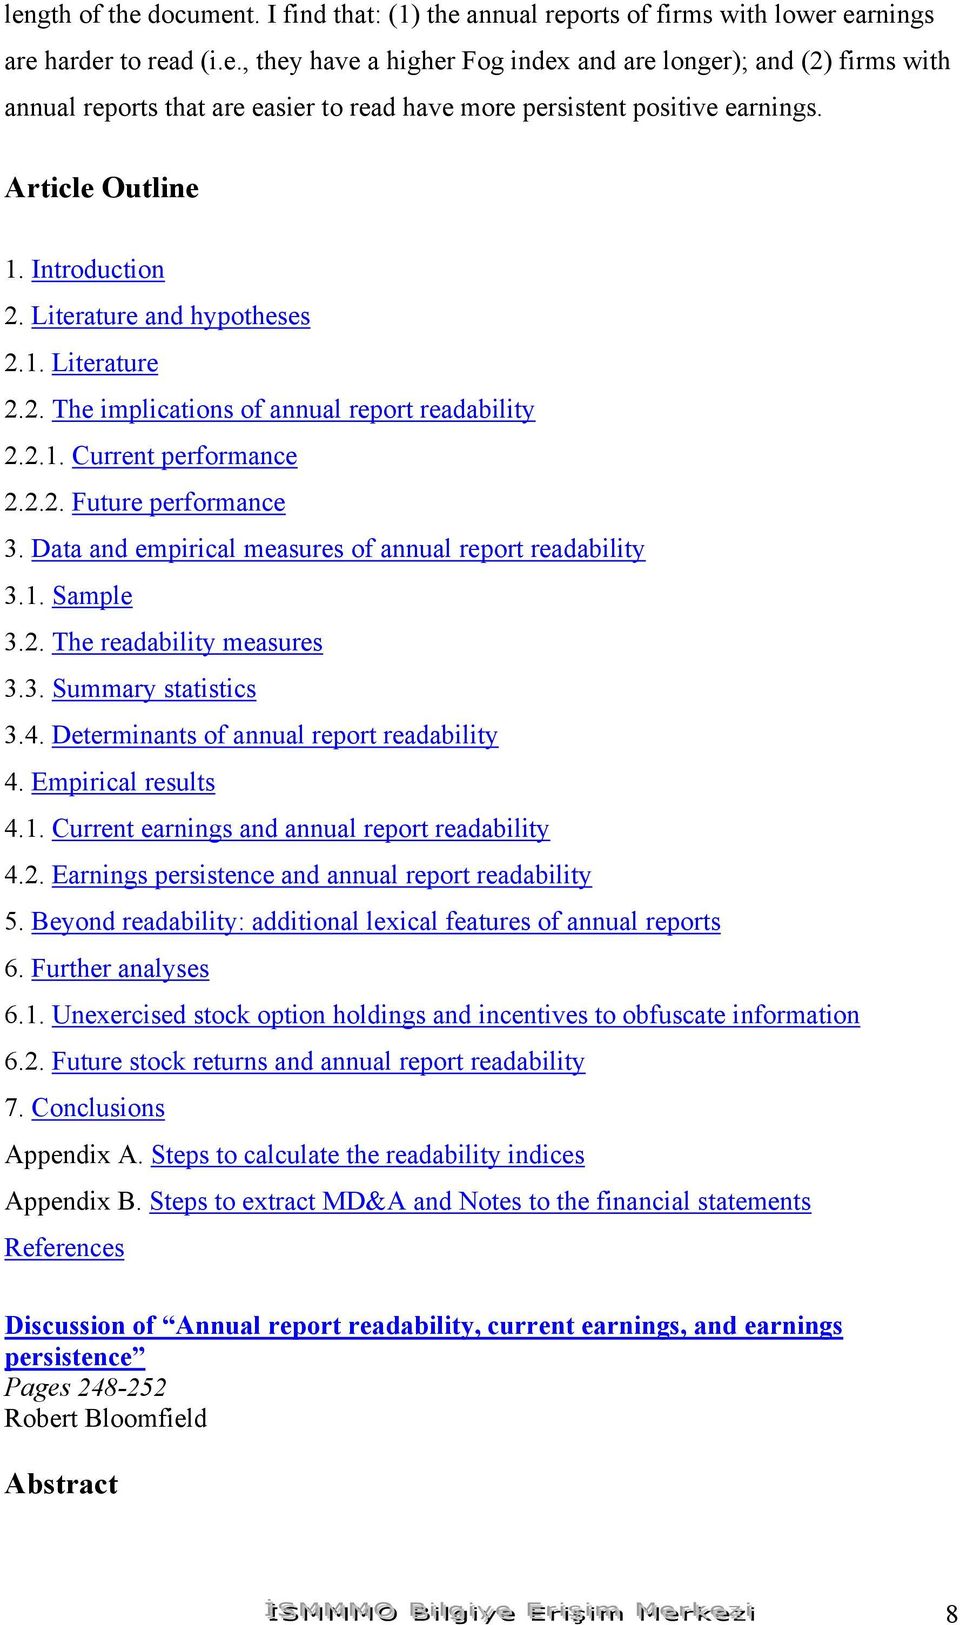 Data and empirical measures of annual report readability 3.1. Sample 3.2. The readability measures 3.3. Summary statistics 3.4. Determinants of annual report readability 4. Empirical results 4.1. Current earnings and annual report readability 4.